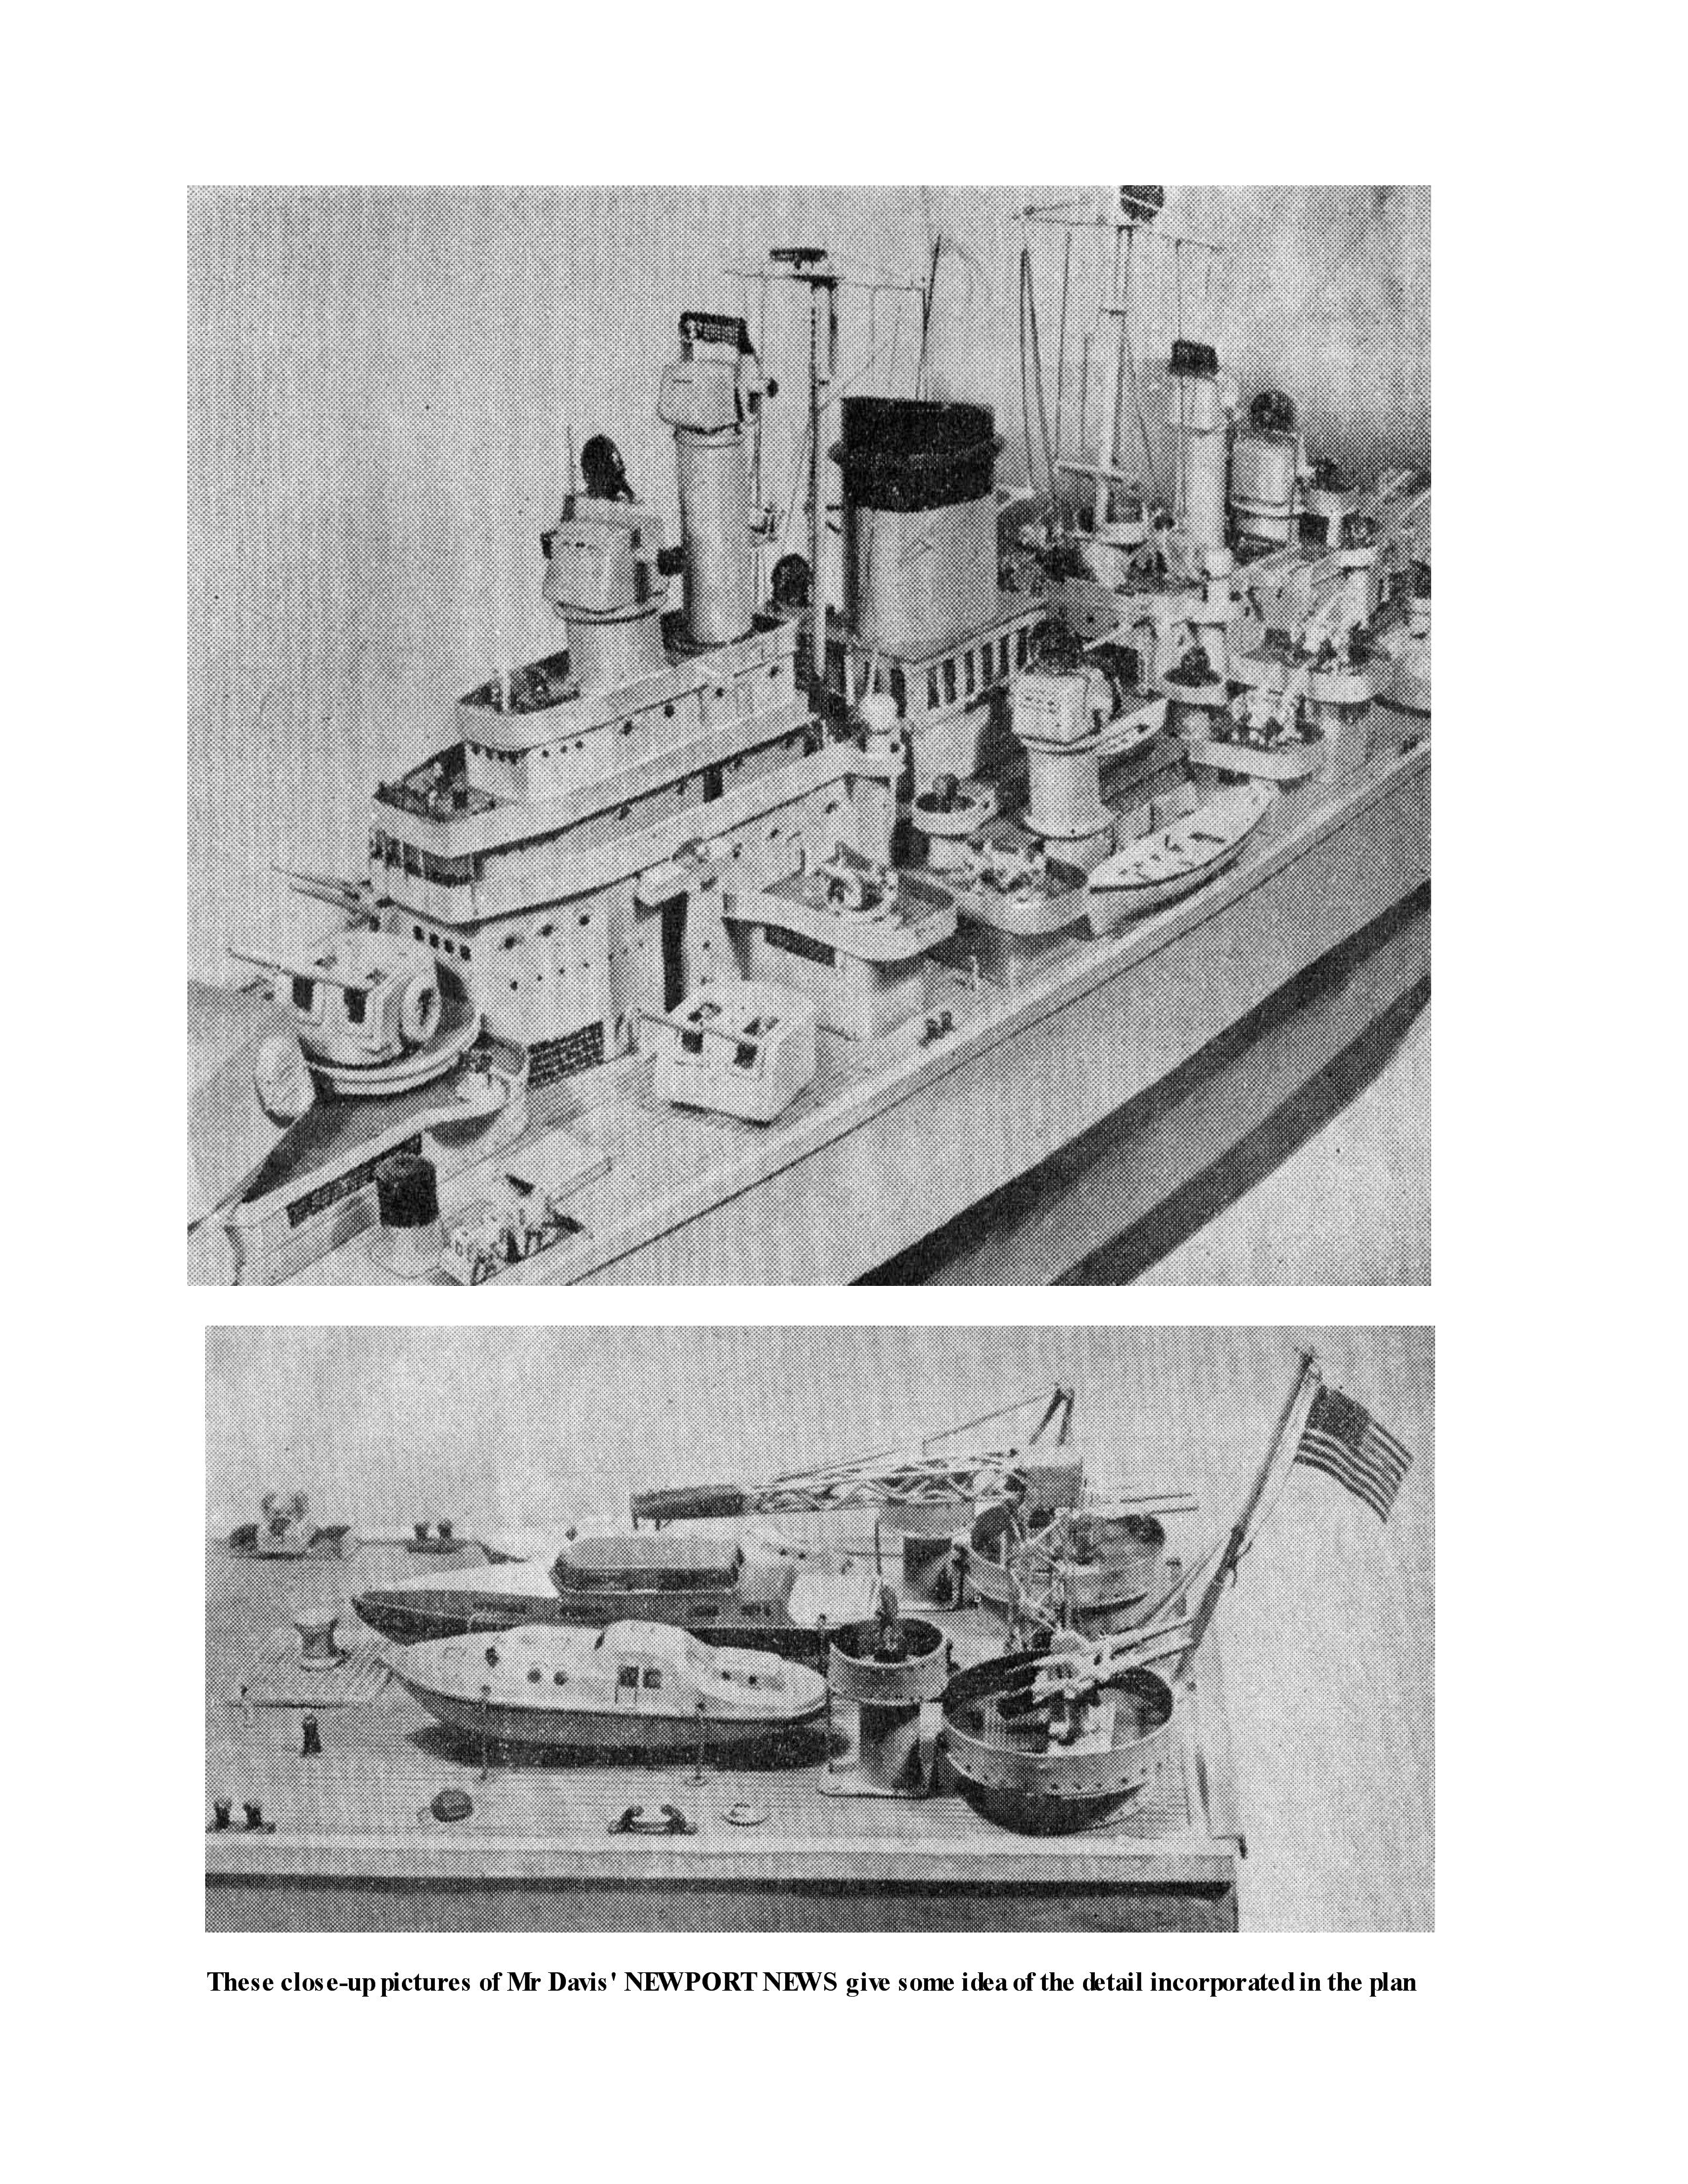 full size printed plan  scale 10" = 112 heavy cruiser "u.s.s. newport news" des moines class